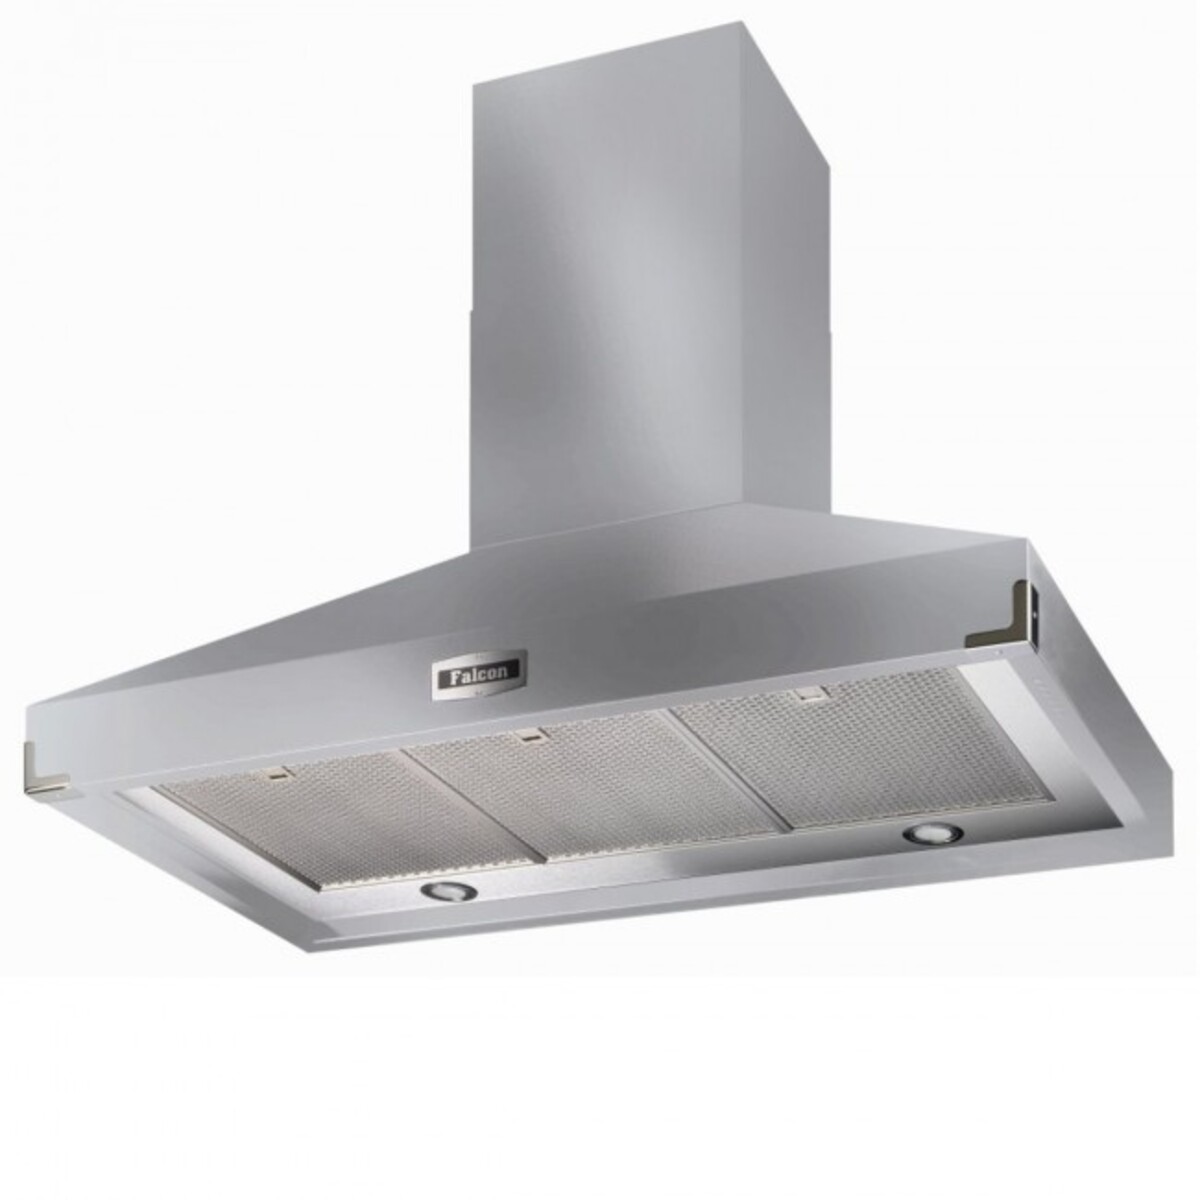 FALCON FHDSE900SSC 90750 900 S-EXTRACT HOOD STAINLESS CHROME